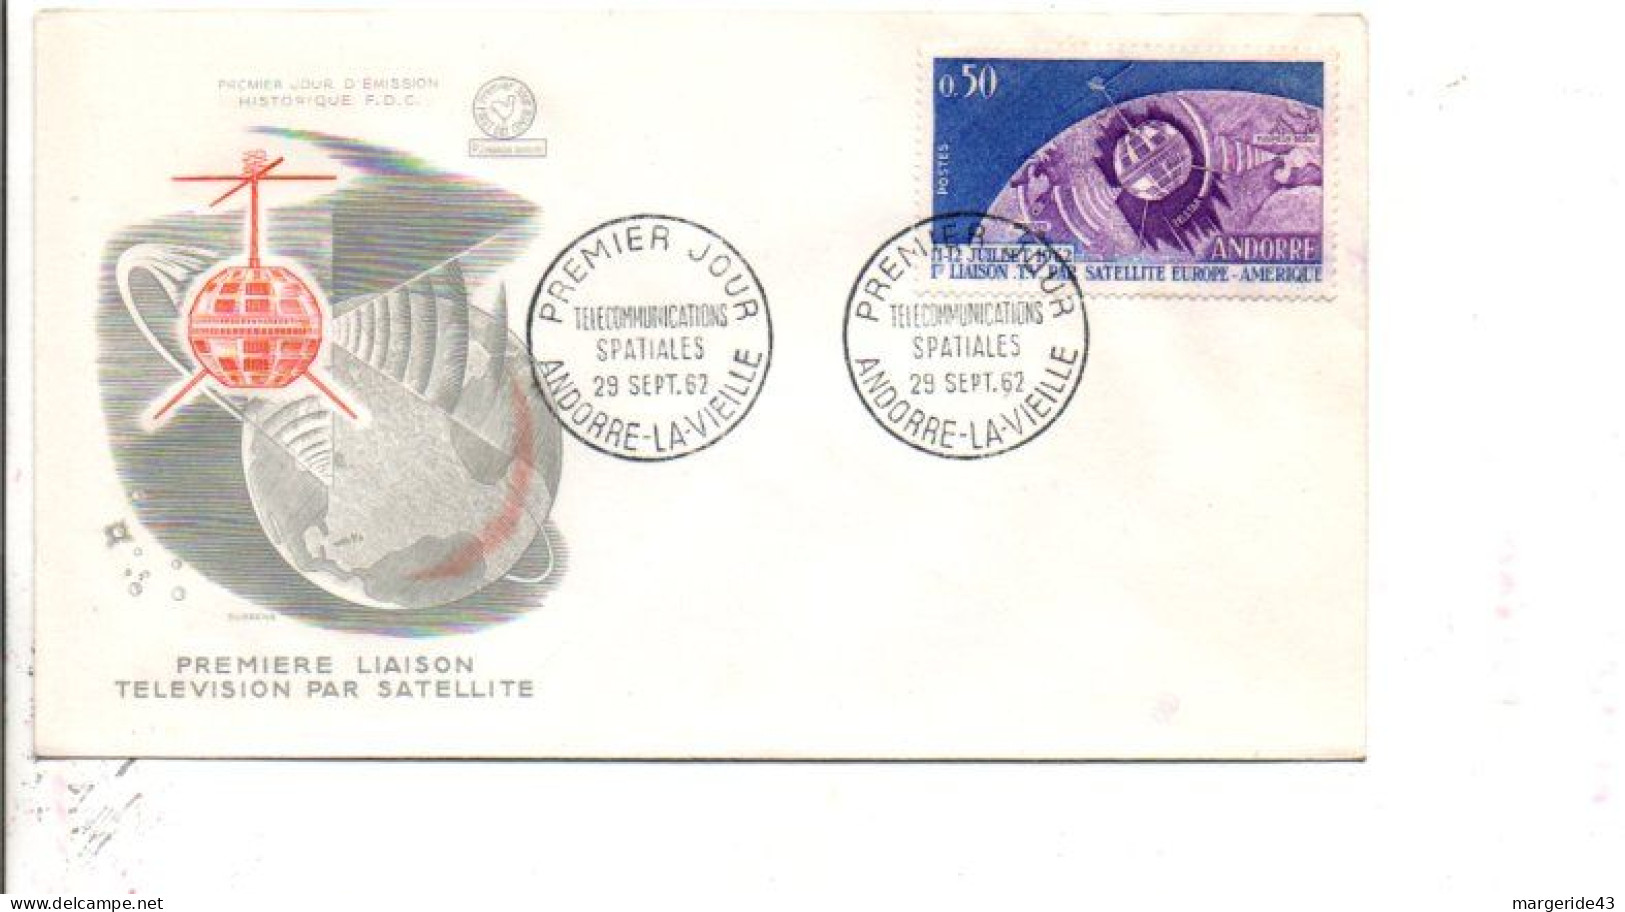 ANDORRE FDC 1967 TELECOMMUNICATIONS SPATIALES - FDC